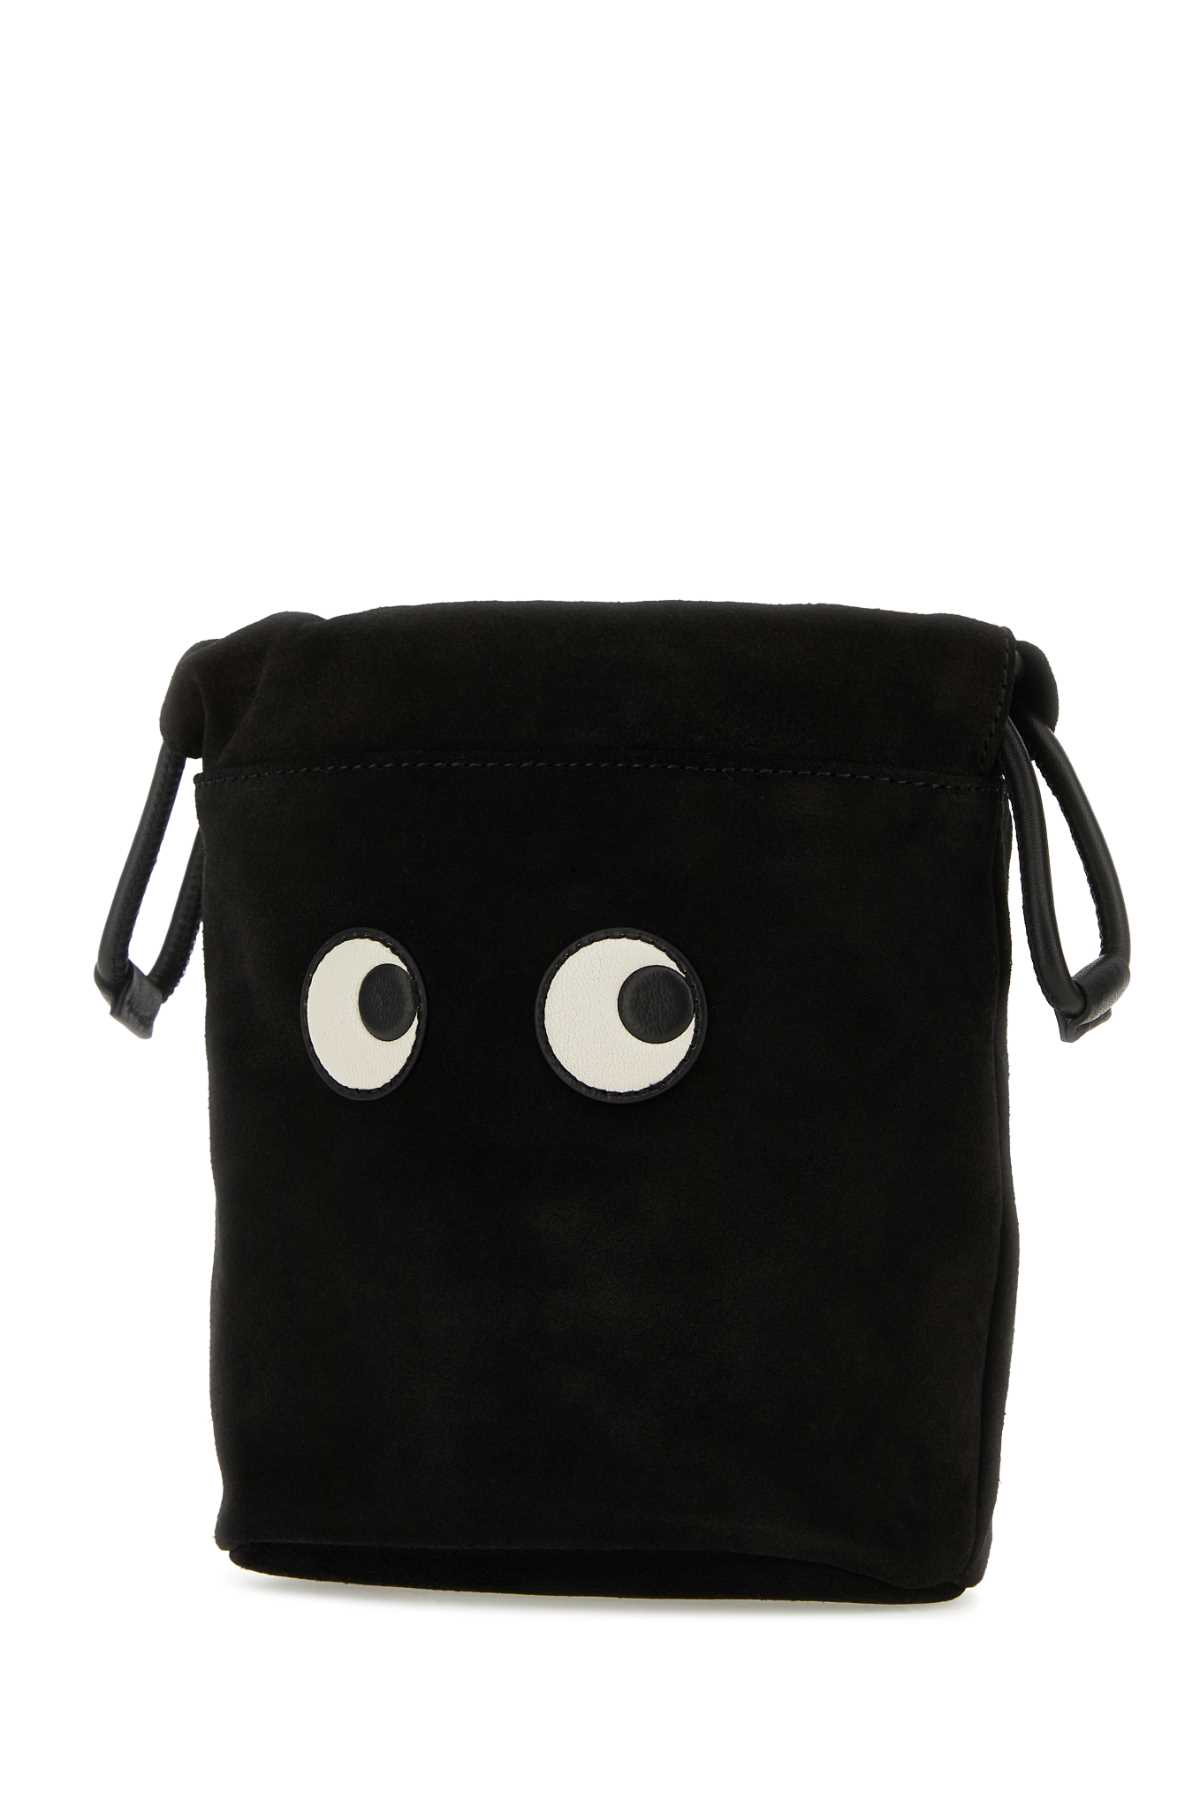 Shop Anya Hindmarch Black Suede Pouch